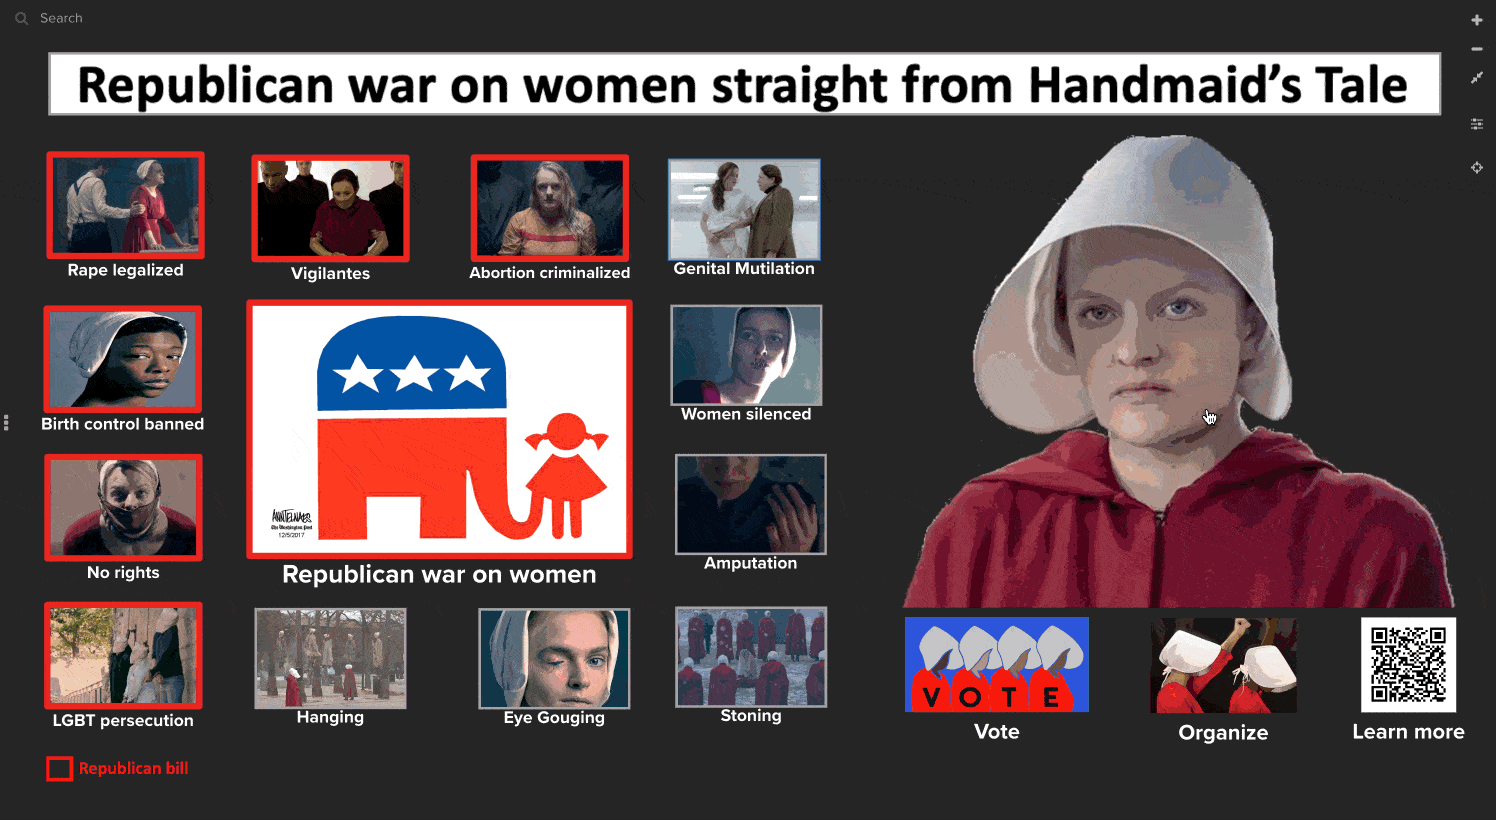 Republicans wage war on women and abortion using Handmaid's Tale as the playbook